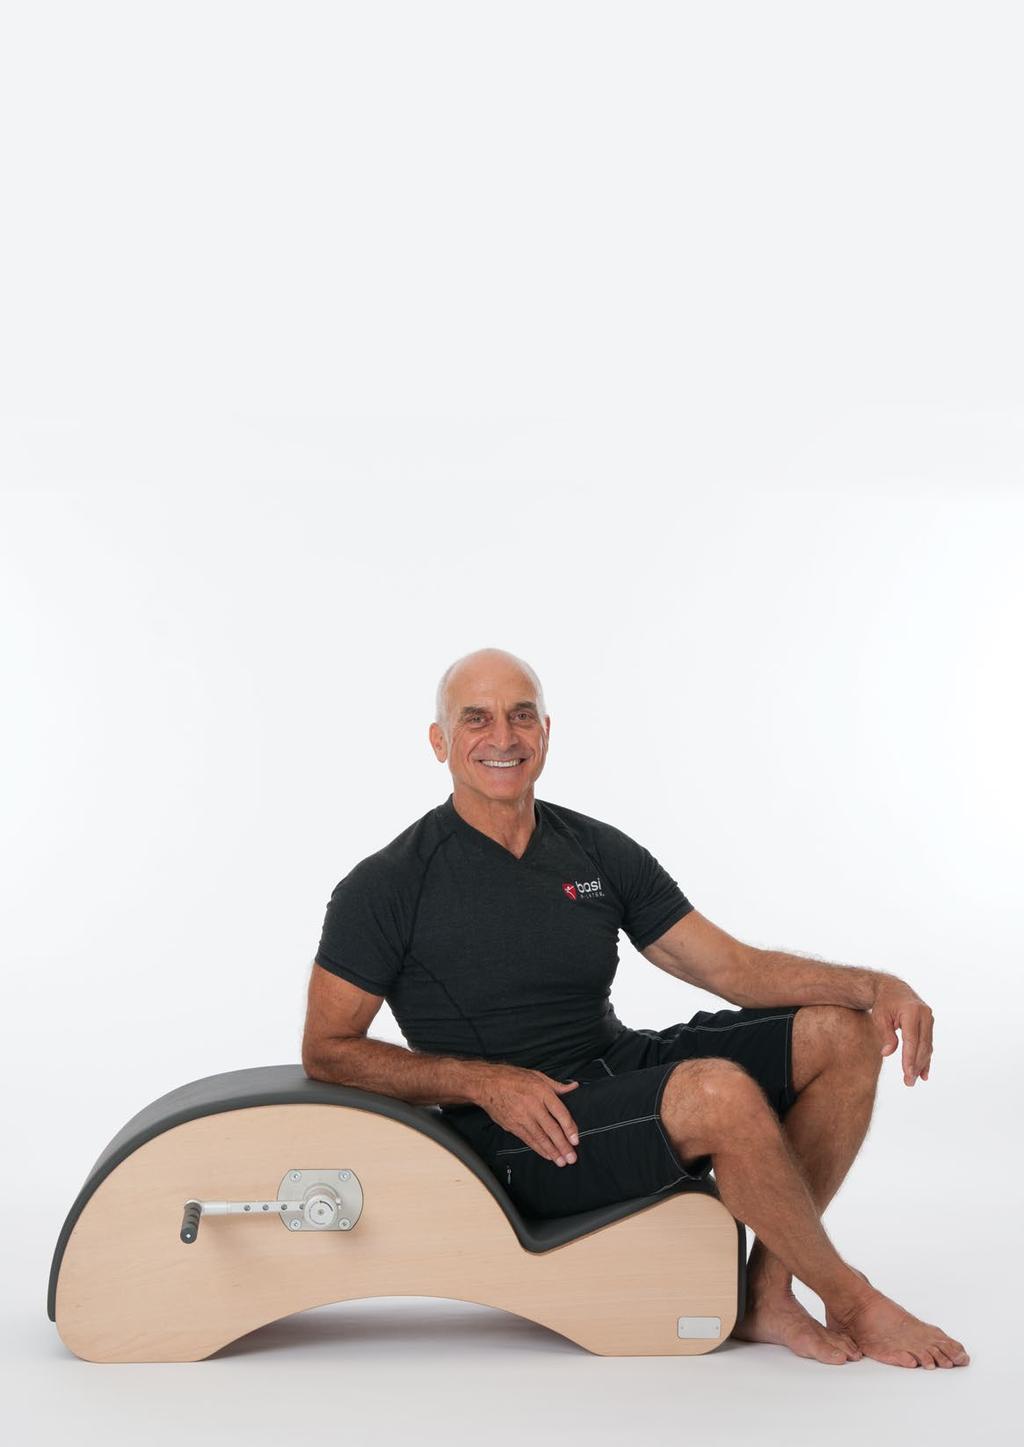 BASI Philosophy My Dear Pilates Friends, I founded Body Arts and Science International (BASI Pilates) in 1989 as a curriculum-based education company for aspiring teachers of the Pilates method.